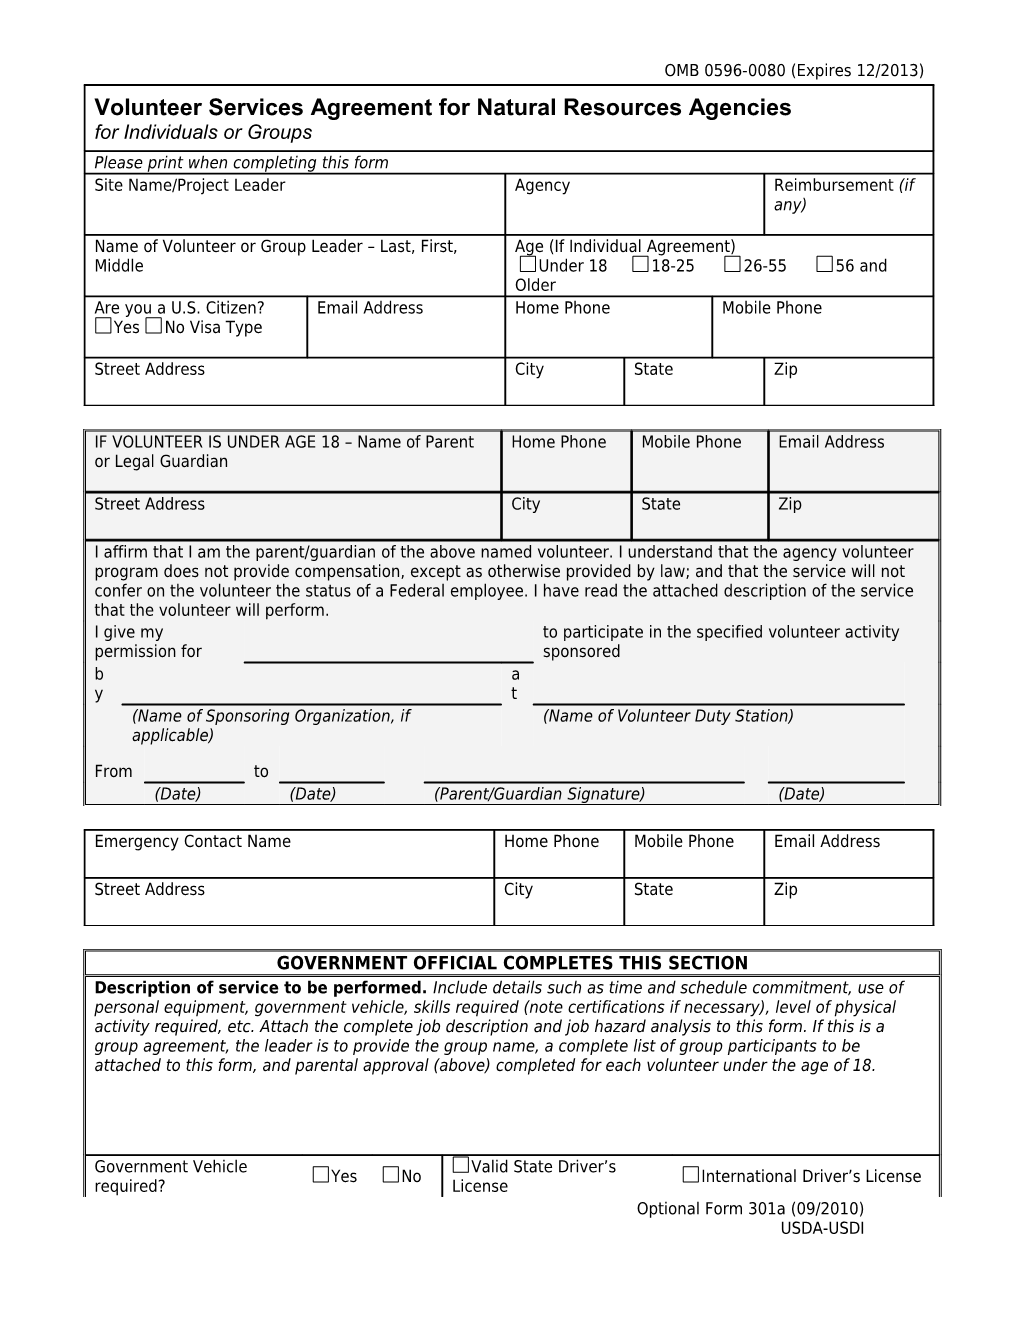 Please Print When Completing This Form